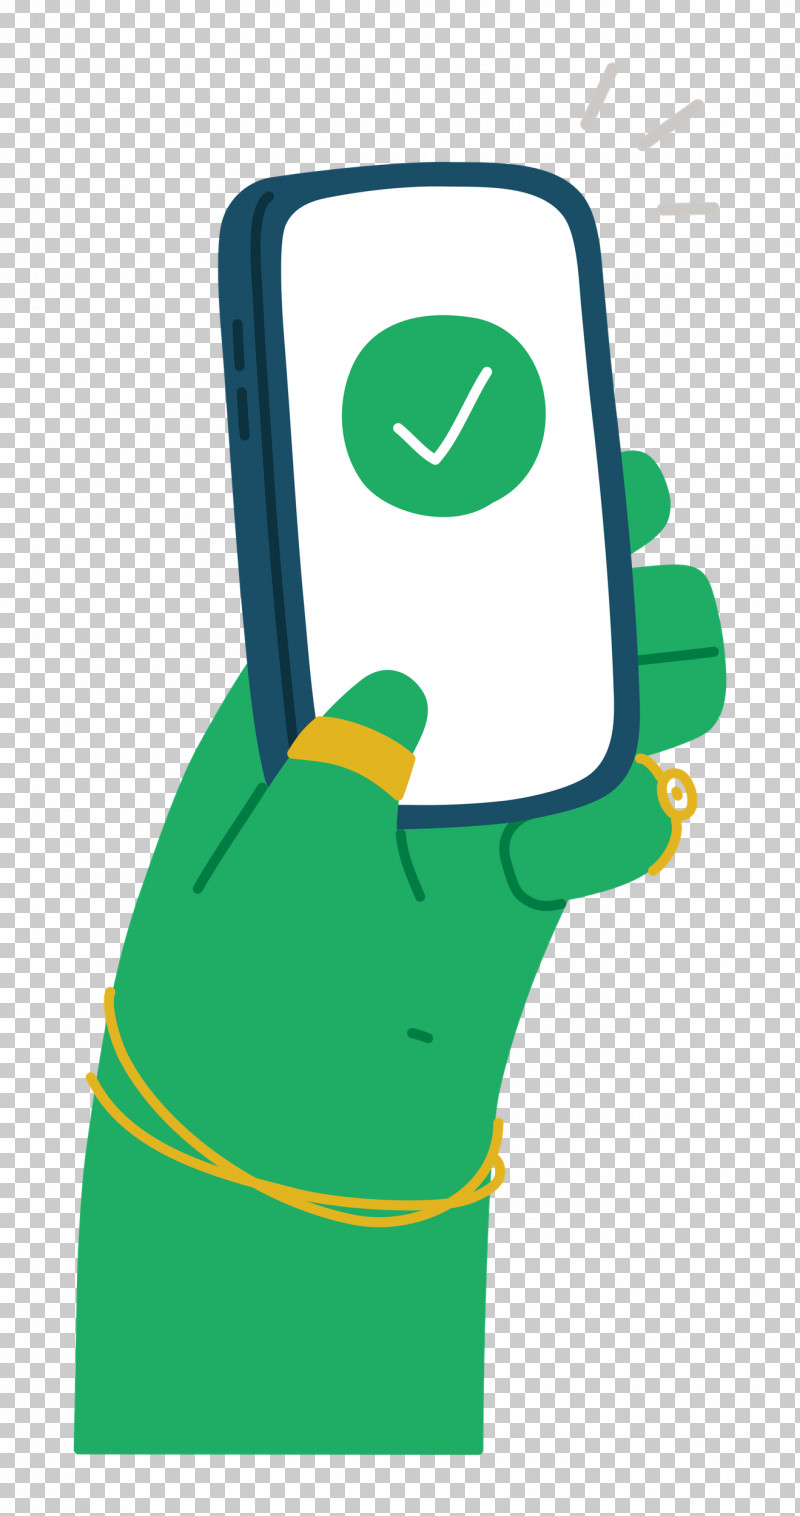 Phone Checkmark Hand PNG, Clipart, Animation, Cartoon, Checkmark, Hand, Logo Free PNG Download